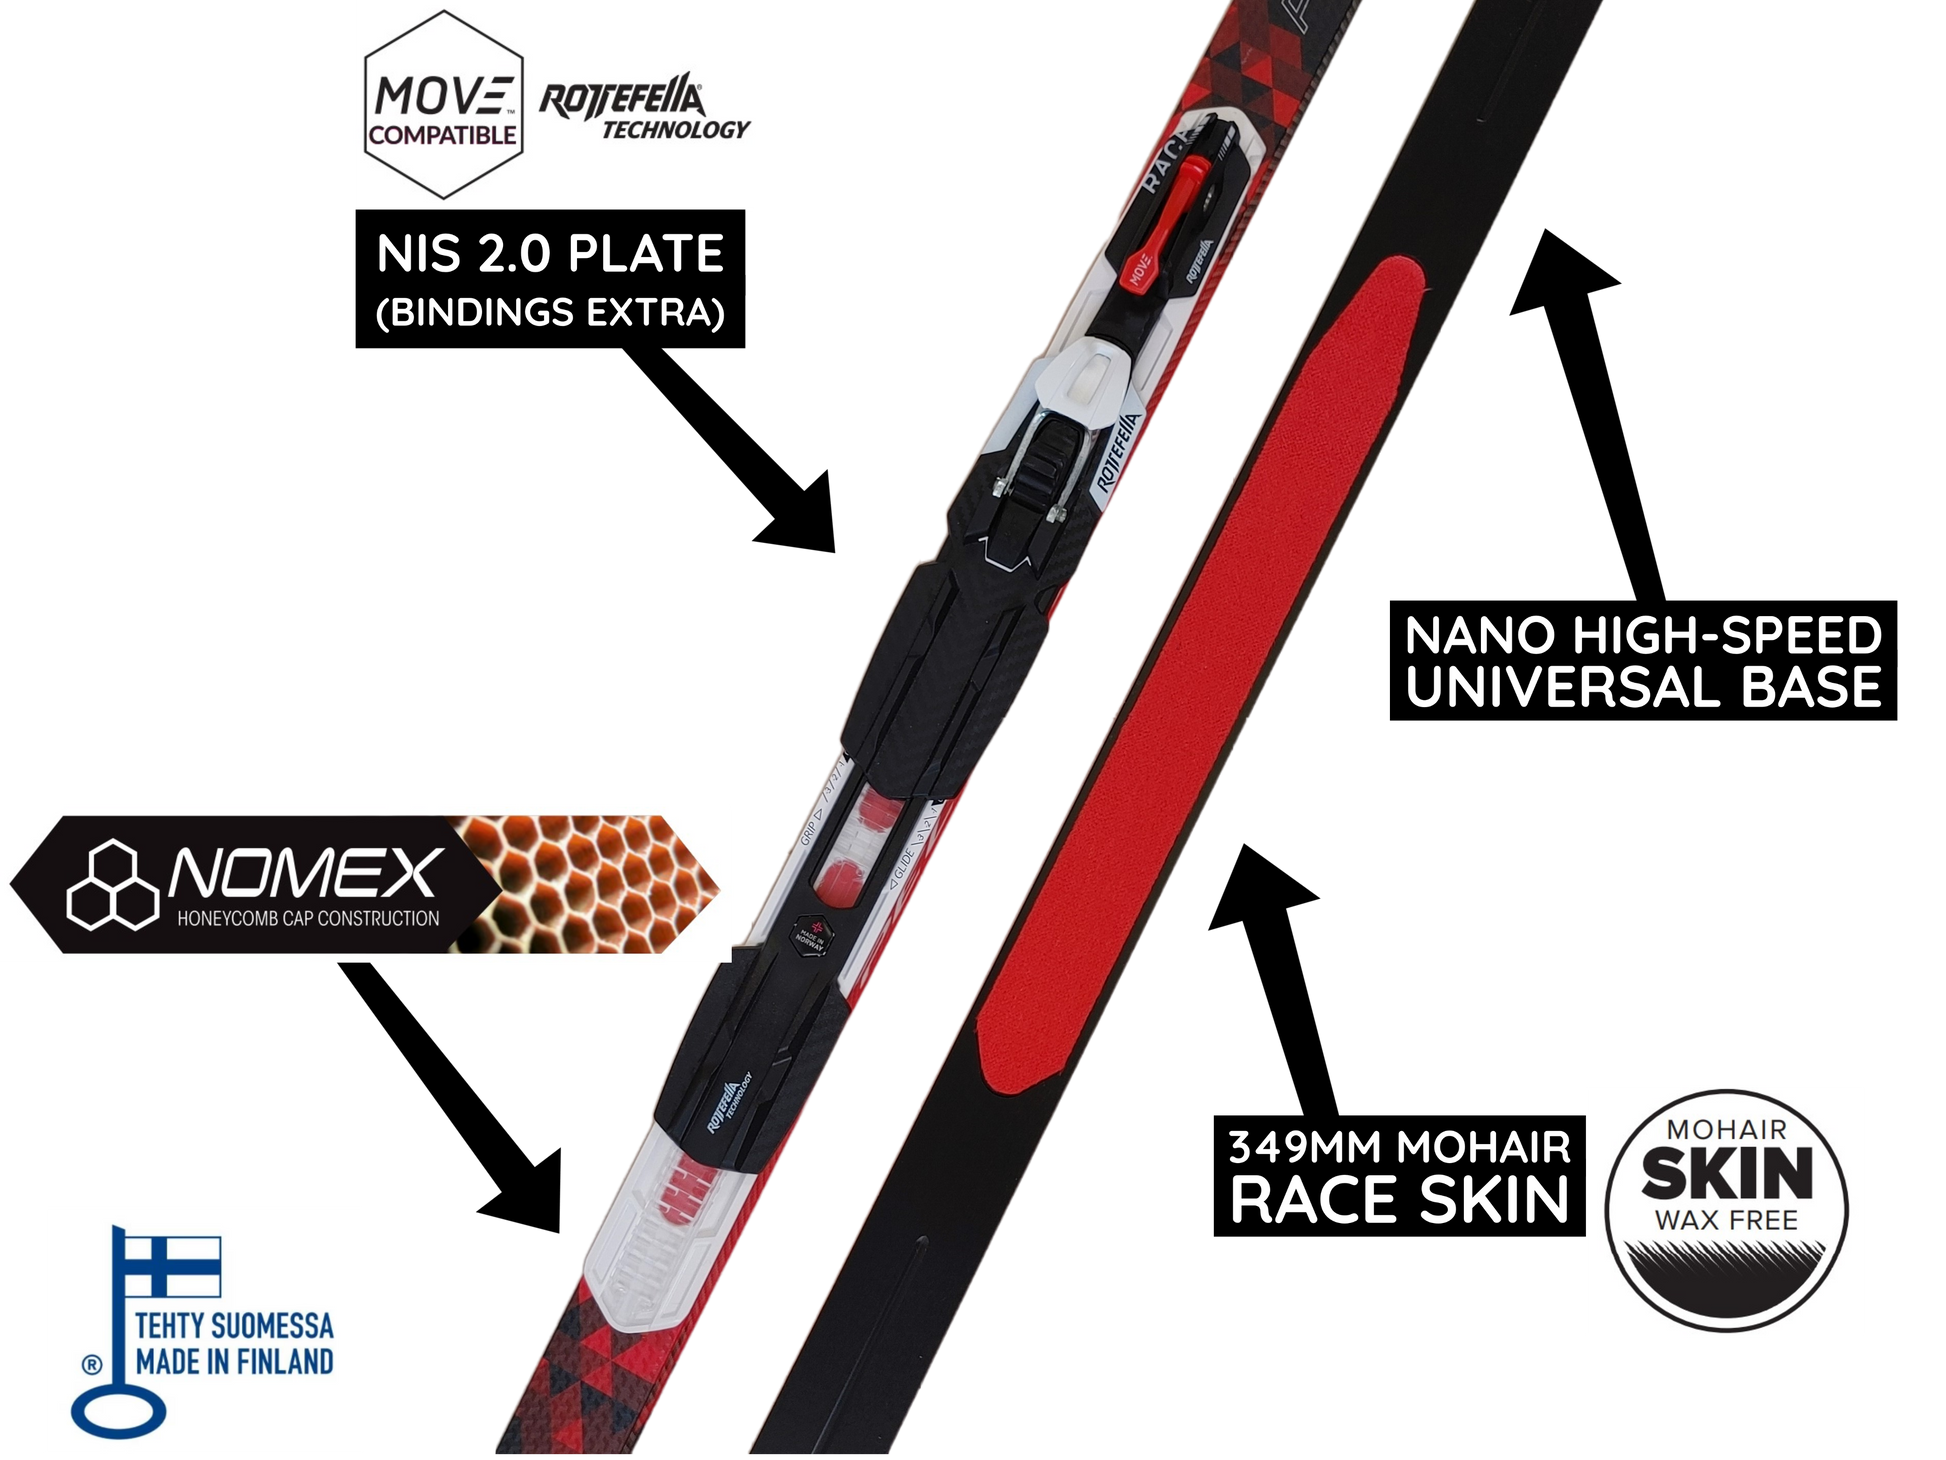 A product picture of the Peltonen INFRA X SKIN 2.0 2020 207cm Stiff Classic Skis B-GRADE MINOR DEFECTS